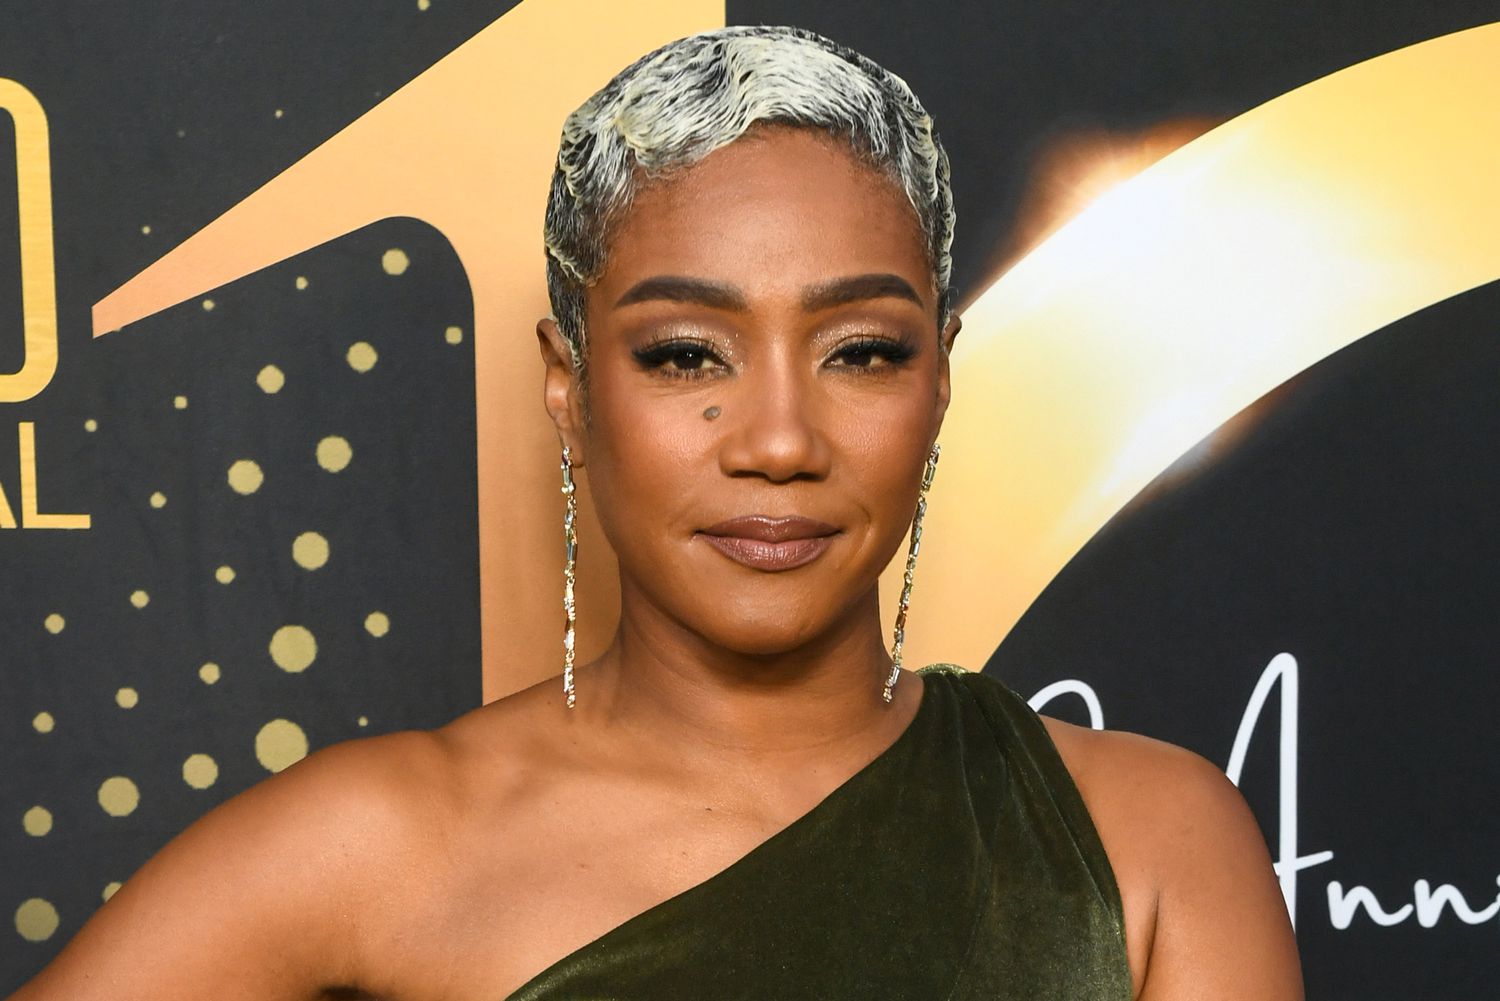 Tiffany Haddish Enters Not Guilty Plea For DUI Charges In Los Angeles